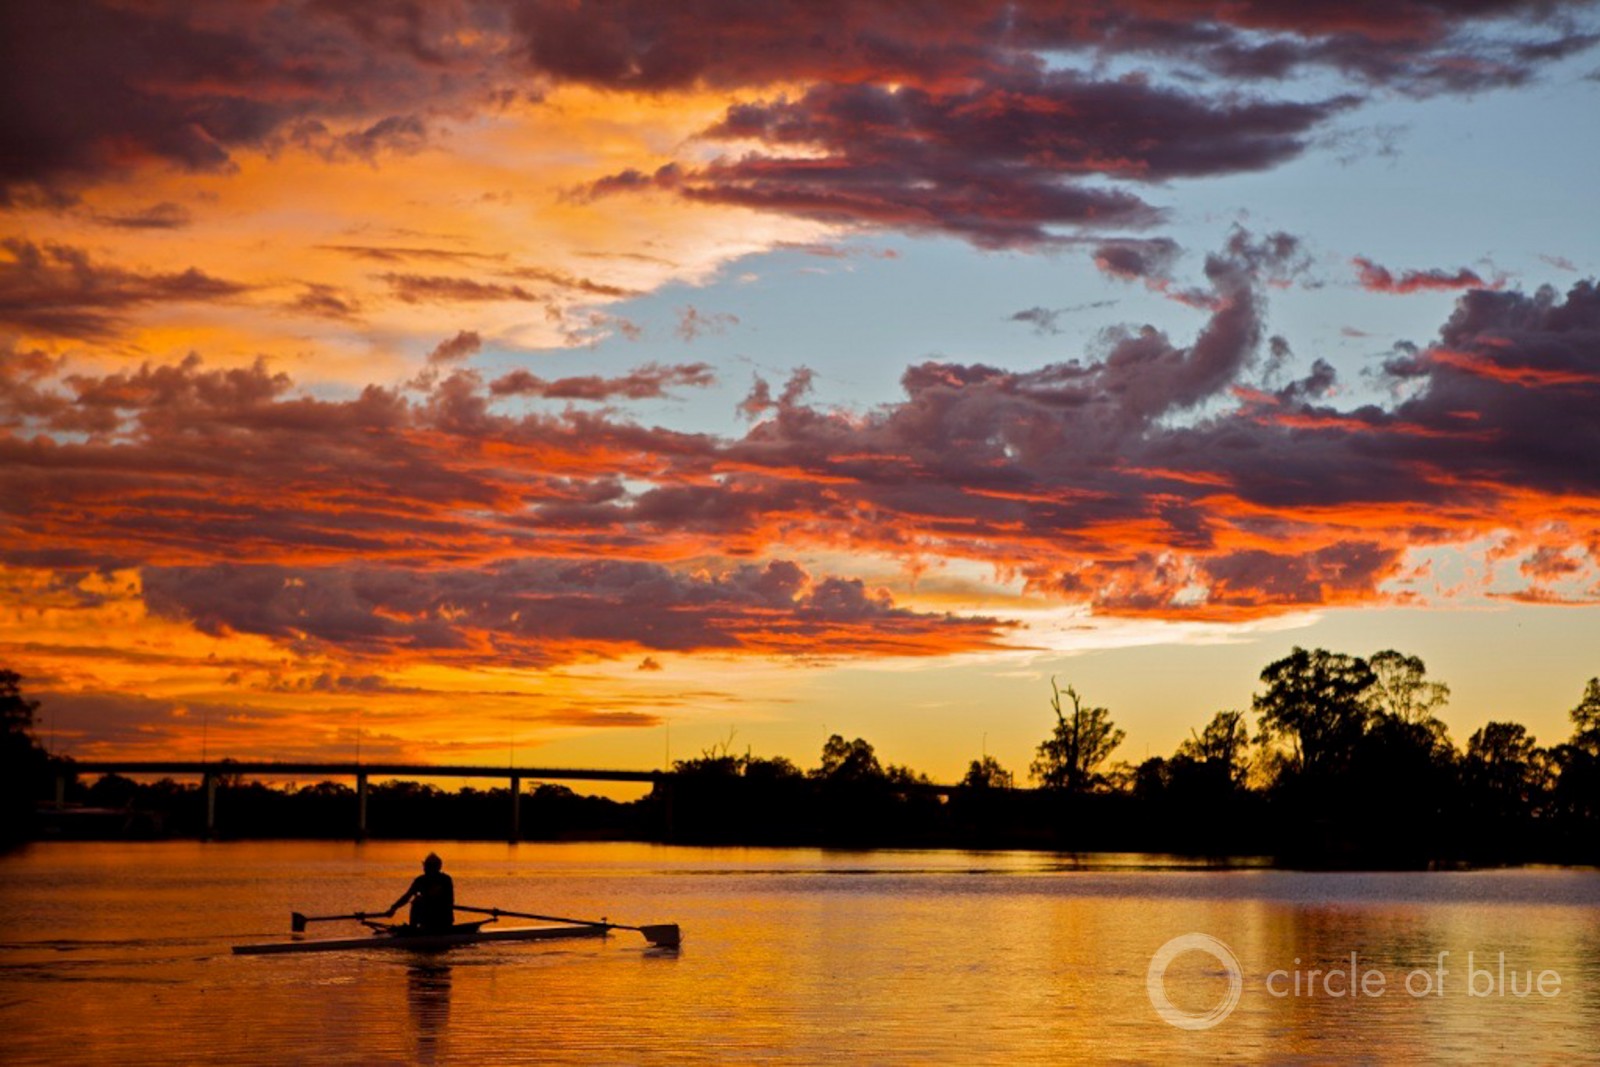 A rower in Mildura, Victoria enjoys a tranquil Murray River. Driven by heat and dry weather, a bloom of potentially toxic algae covers more than 500 kilometers of the river's water this year. Photo © J. Carl Ganter / Circle of Blue